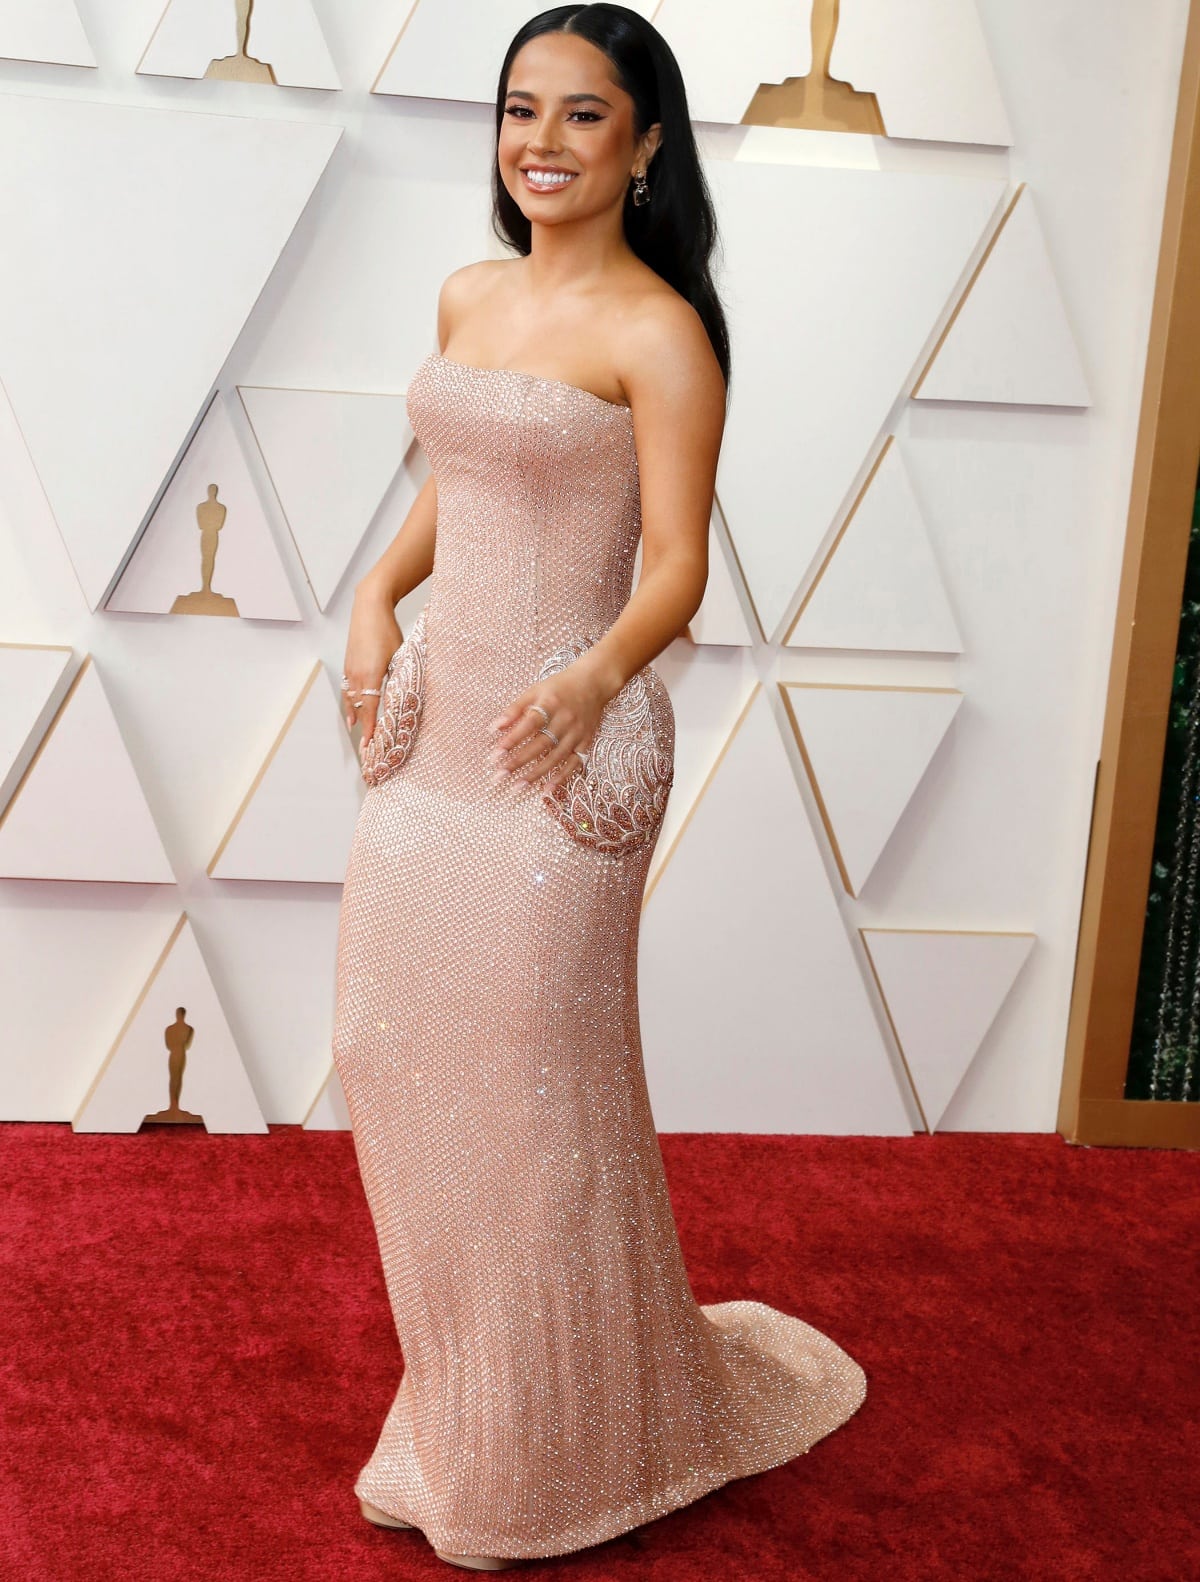 Becky G wearing a custom Etro gown at the 94th Academy Awards